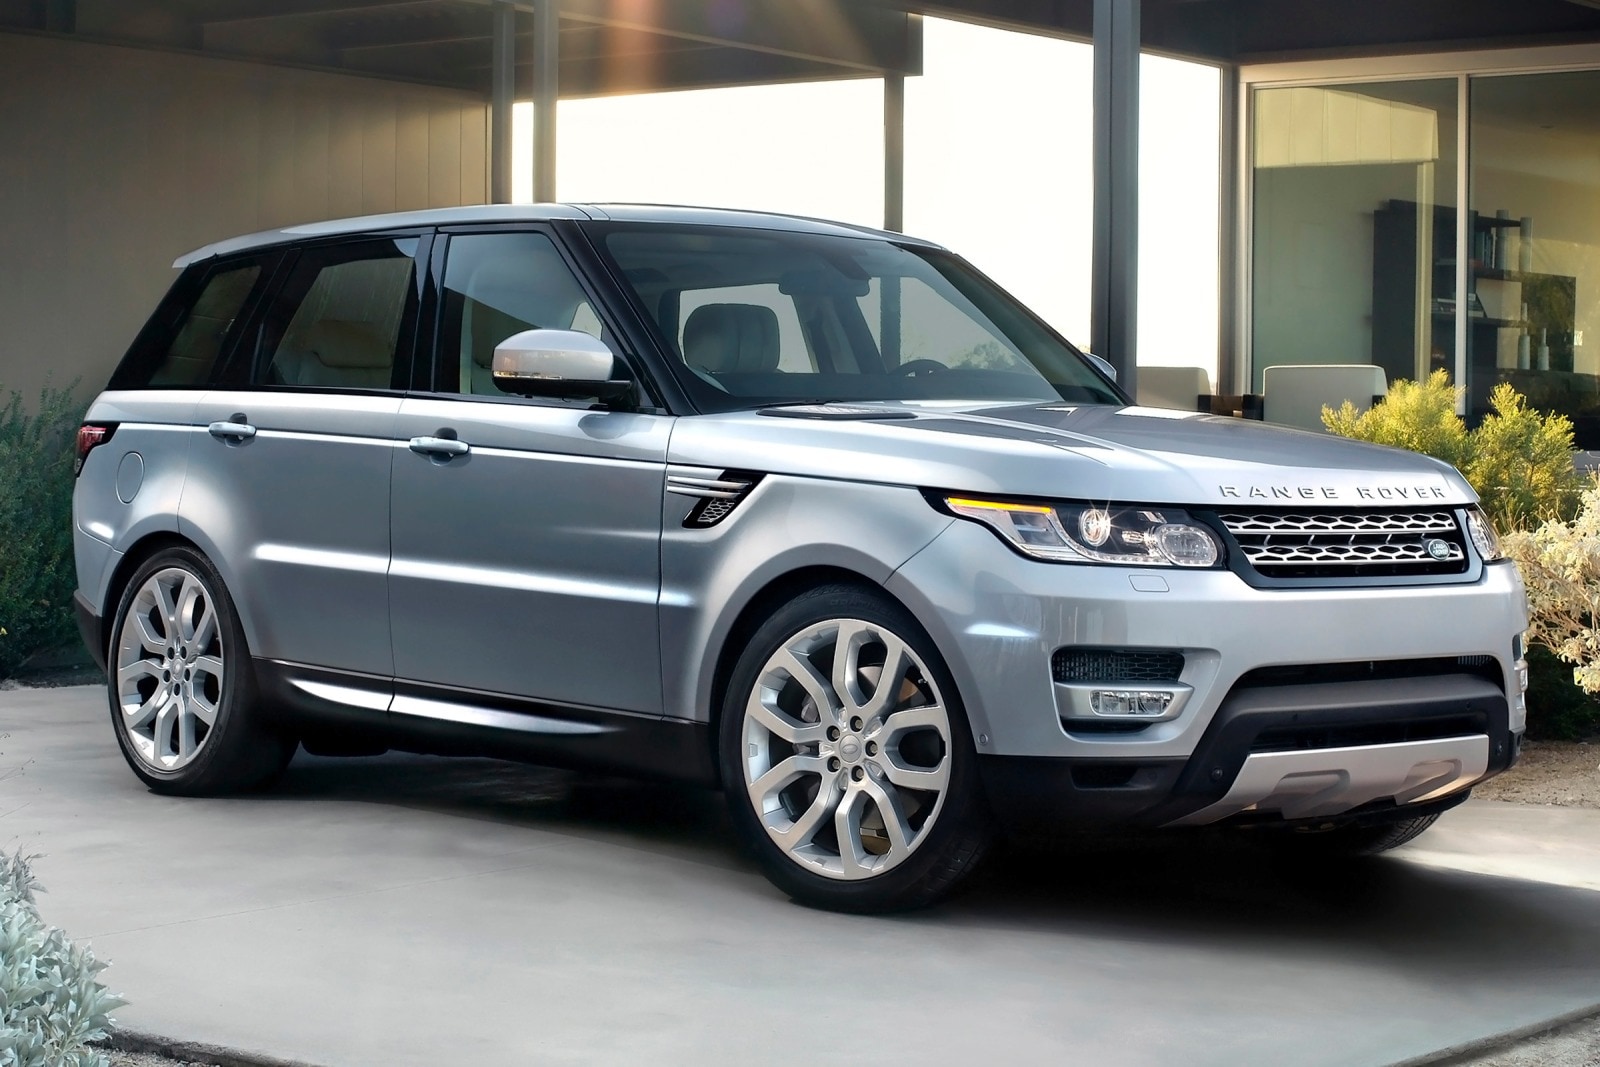 3 - The Least Reliable Cars You Can Buy - Range Rover Sport